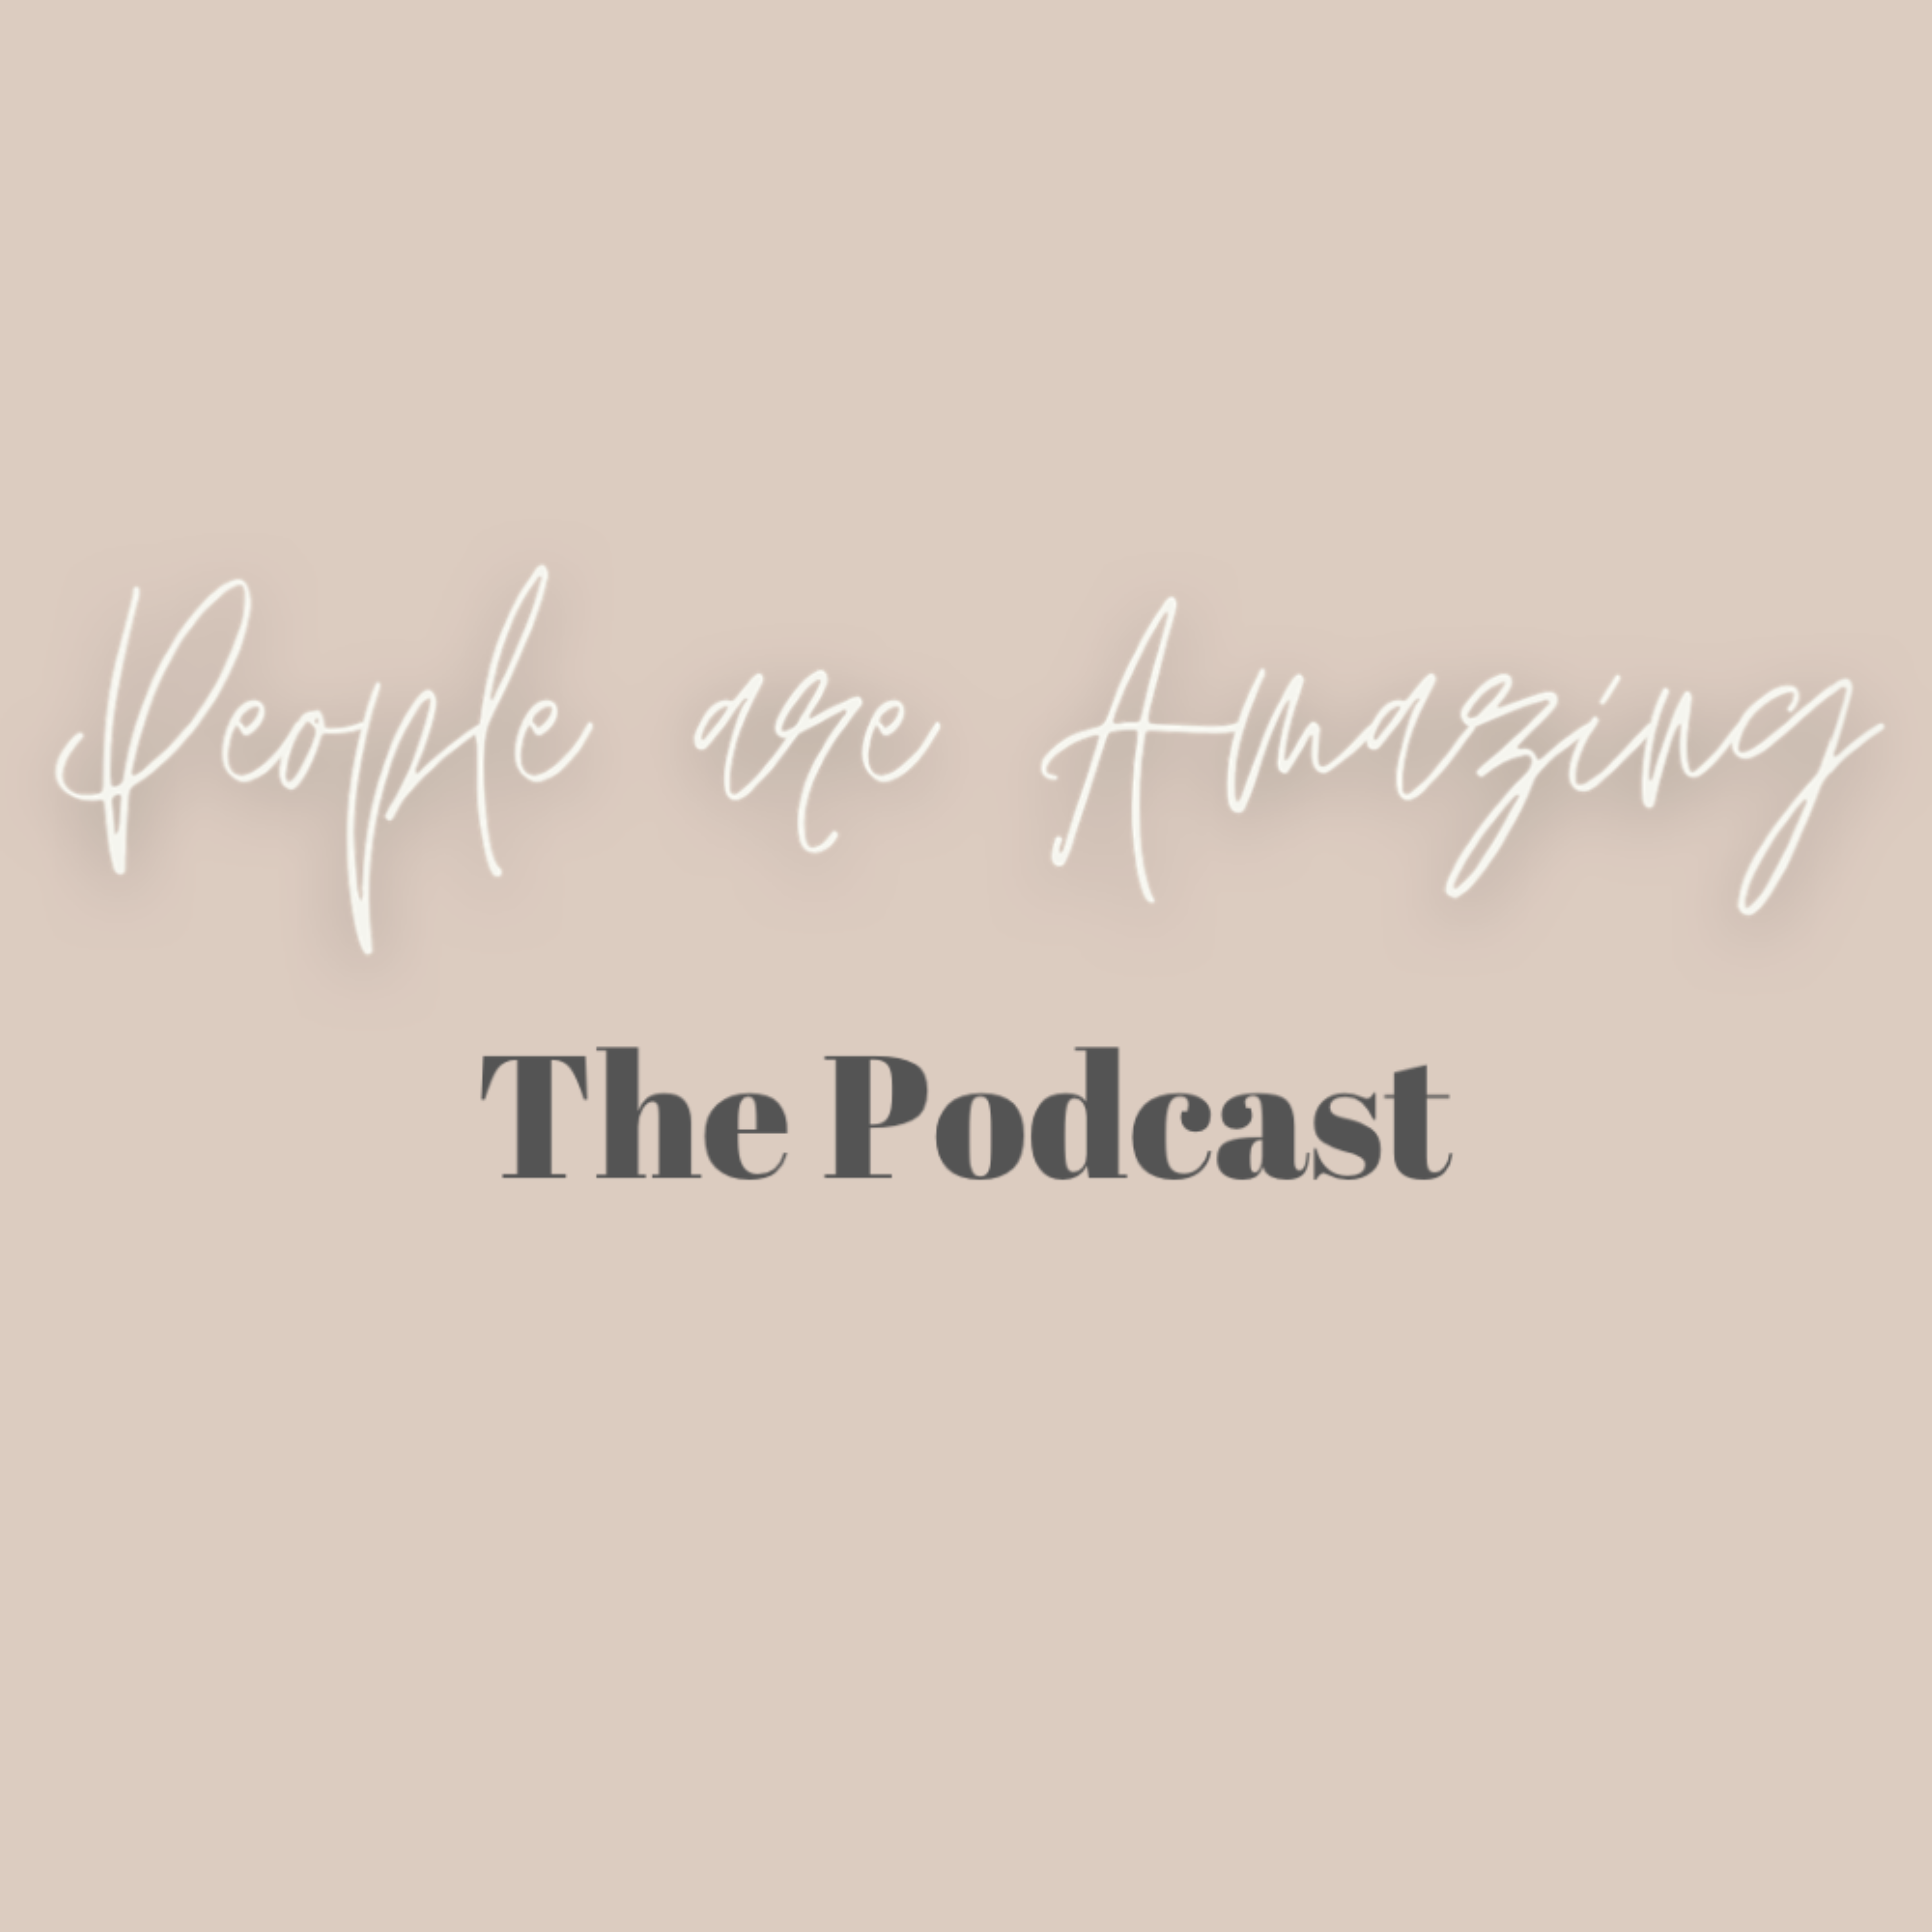 People are Amazing, The Podcast